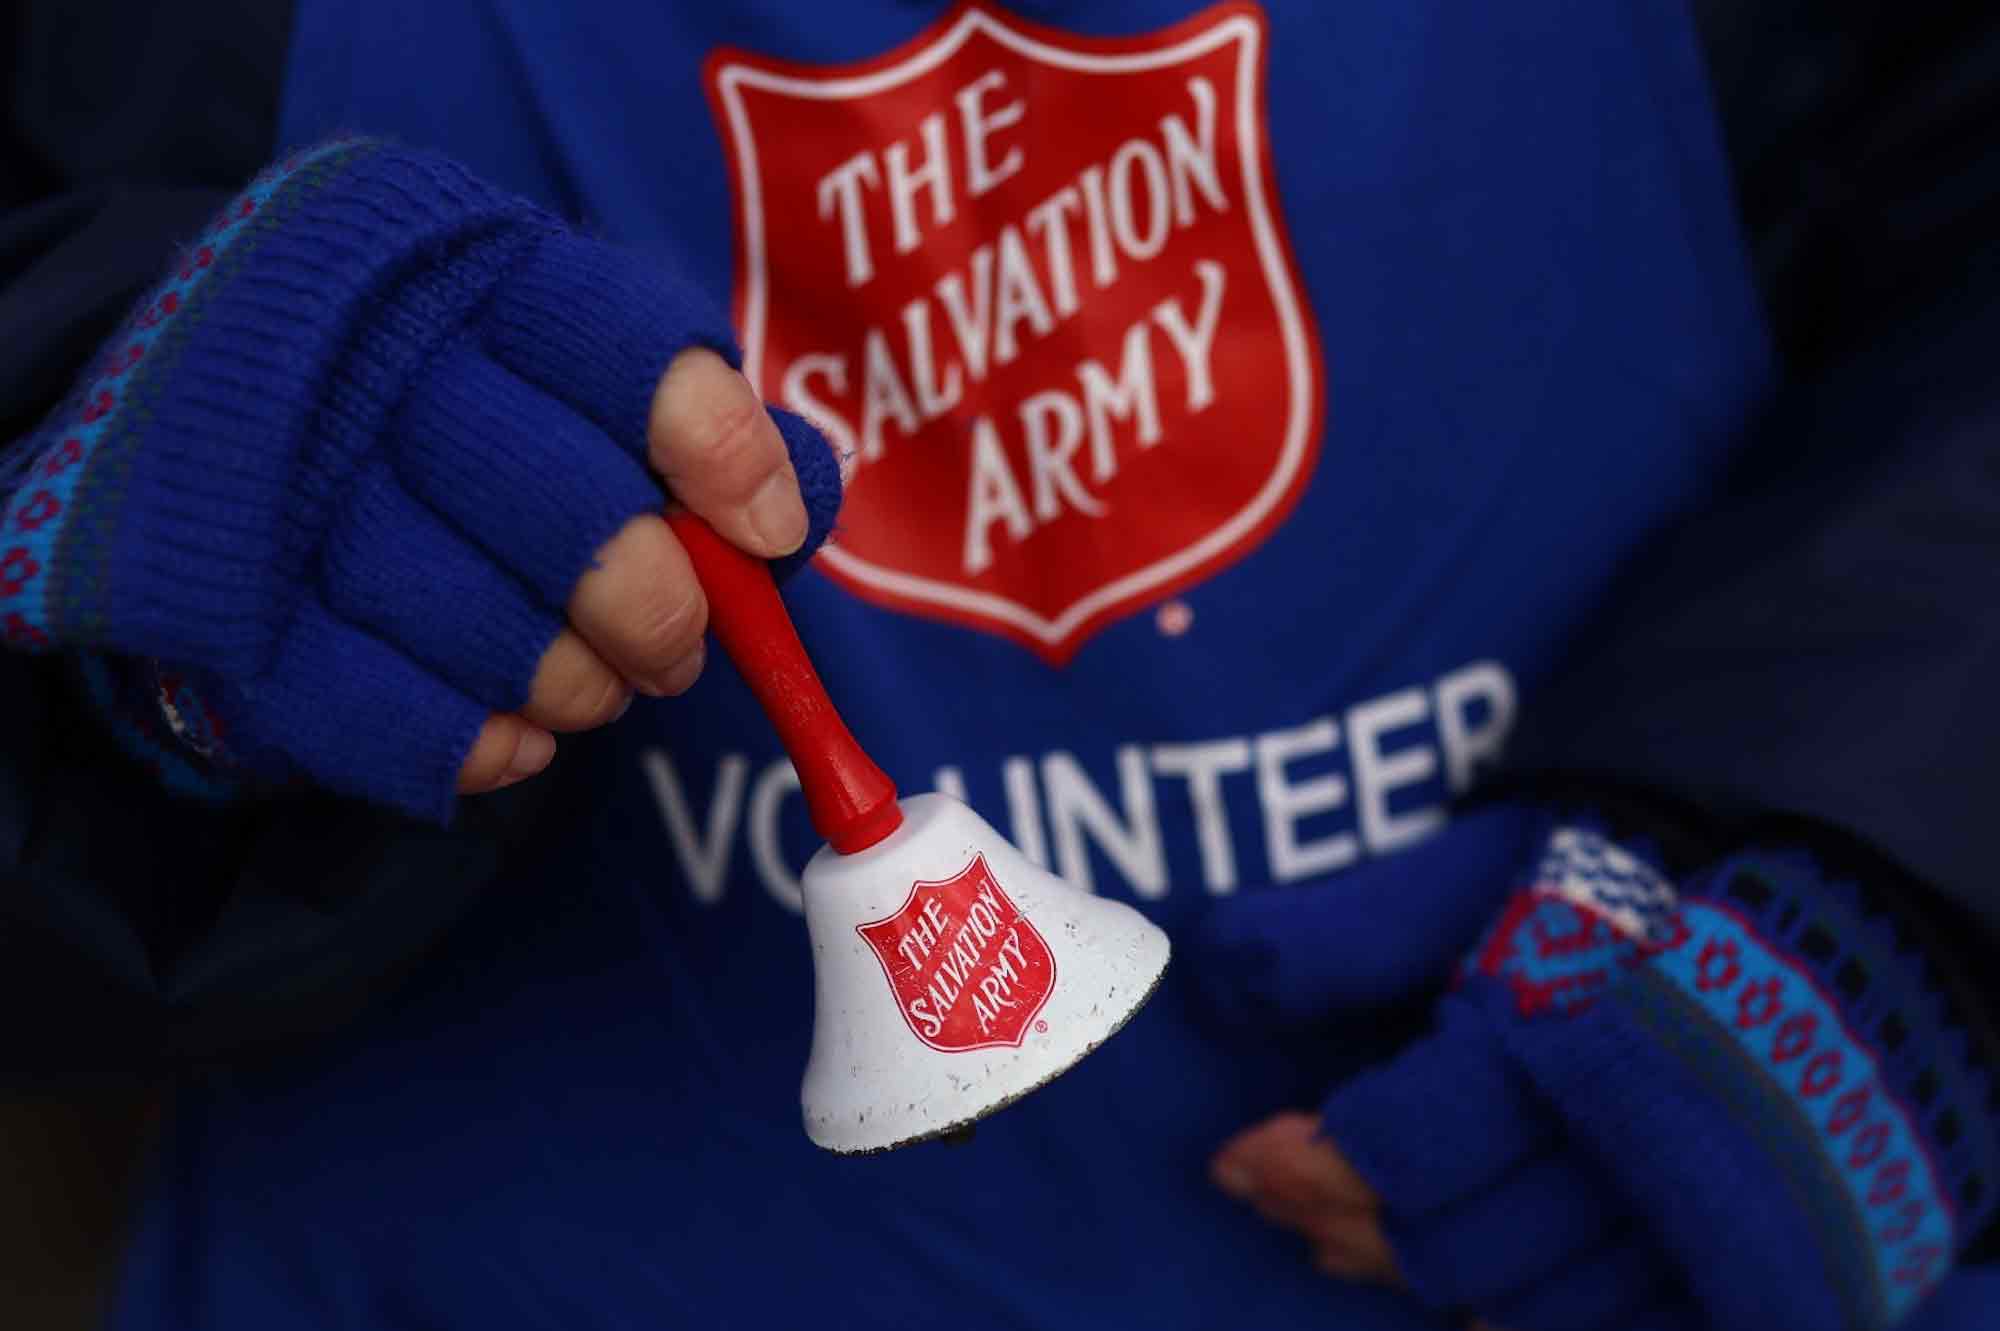 4 ways to volunteer virtually with The Salvation Army this holiday season